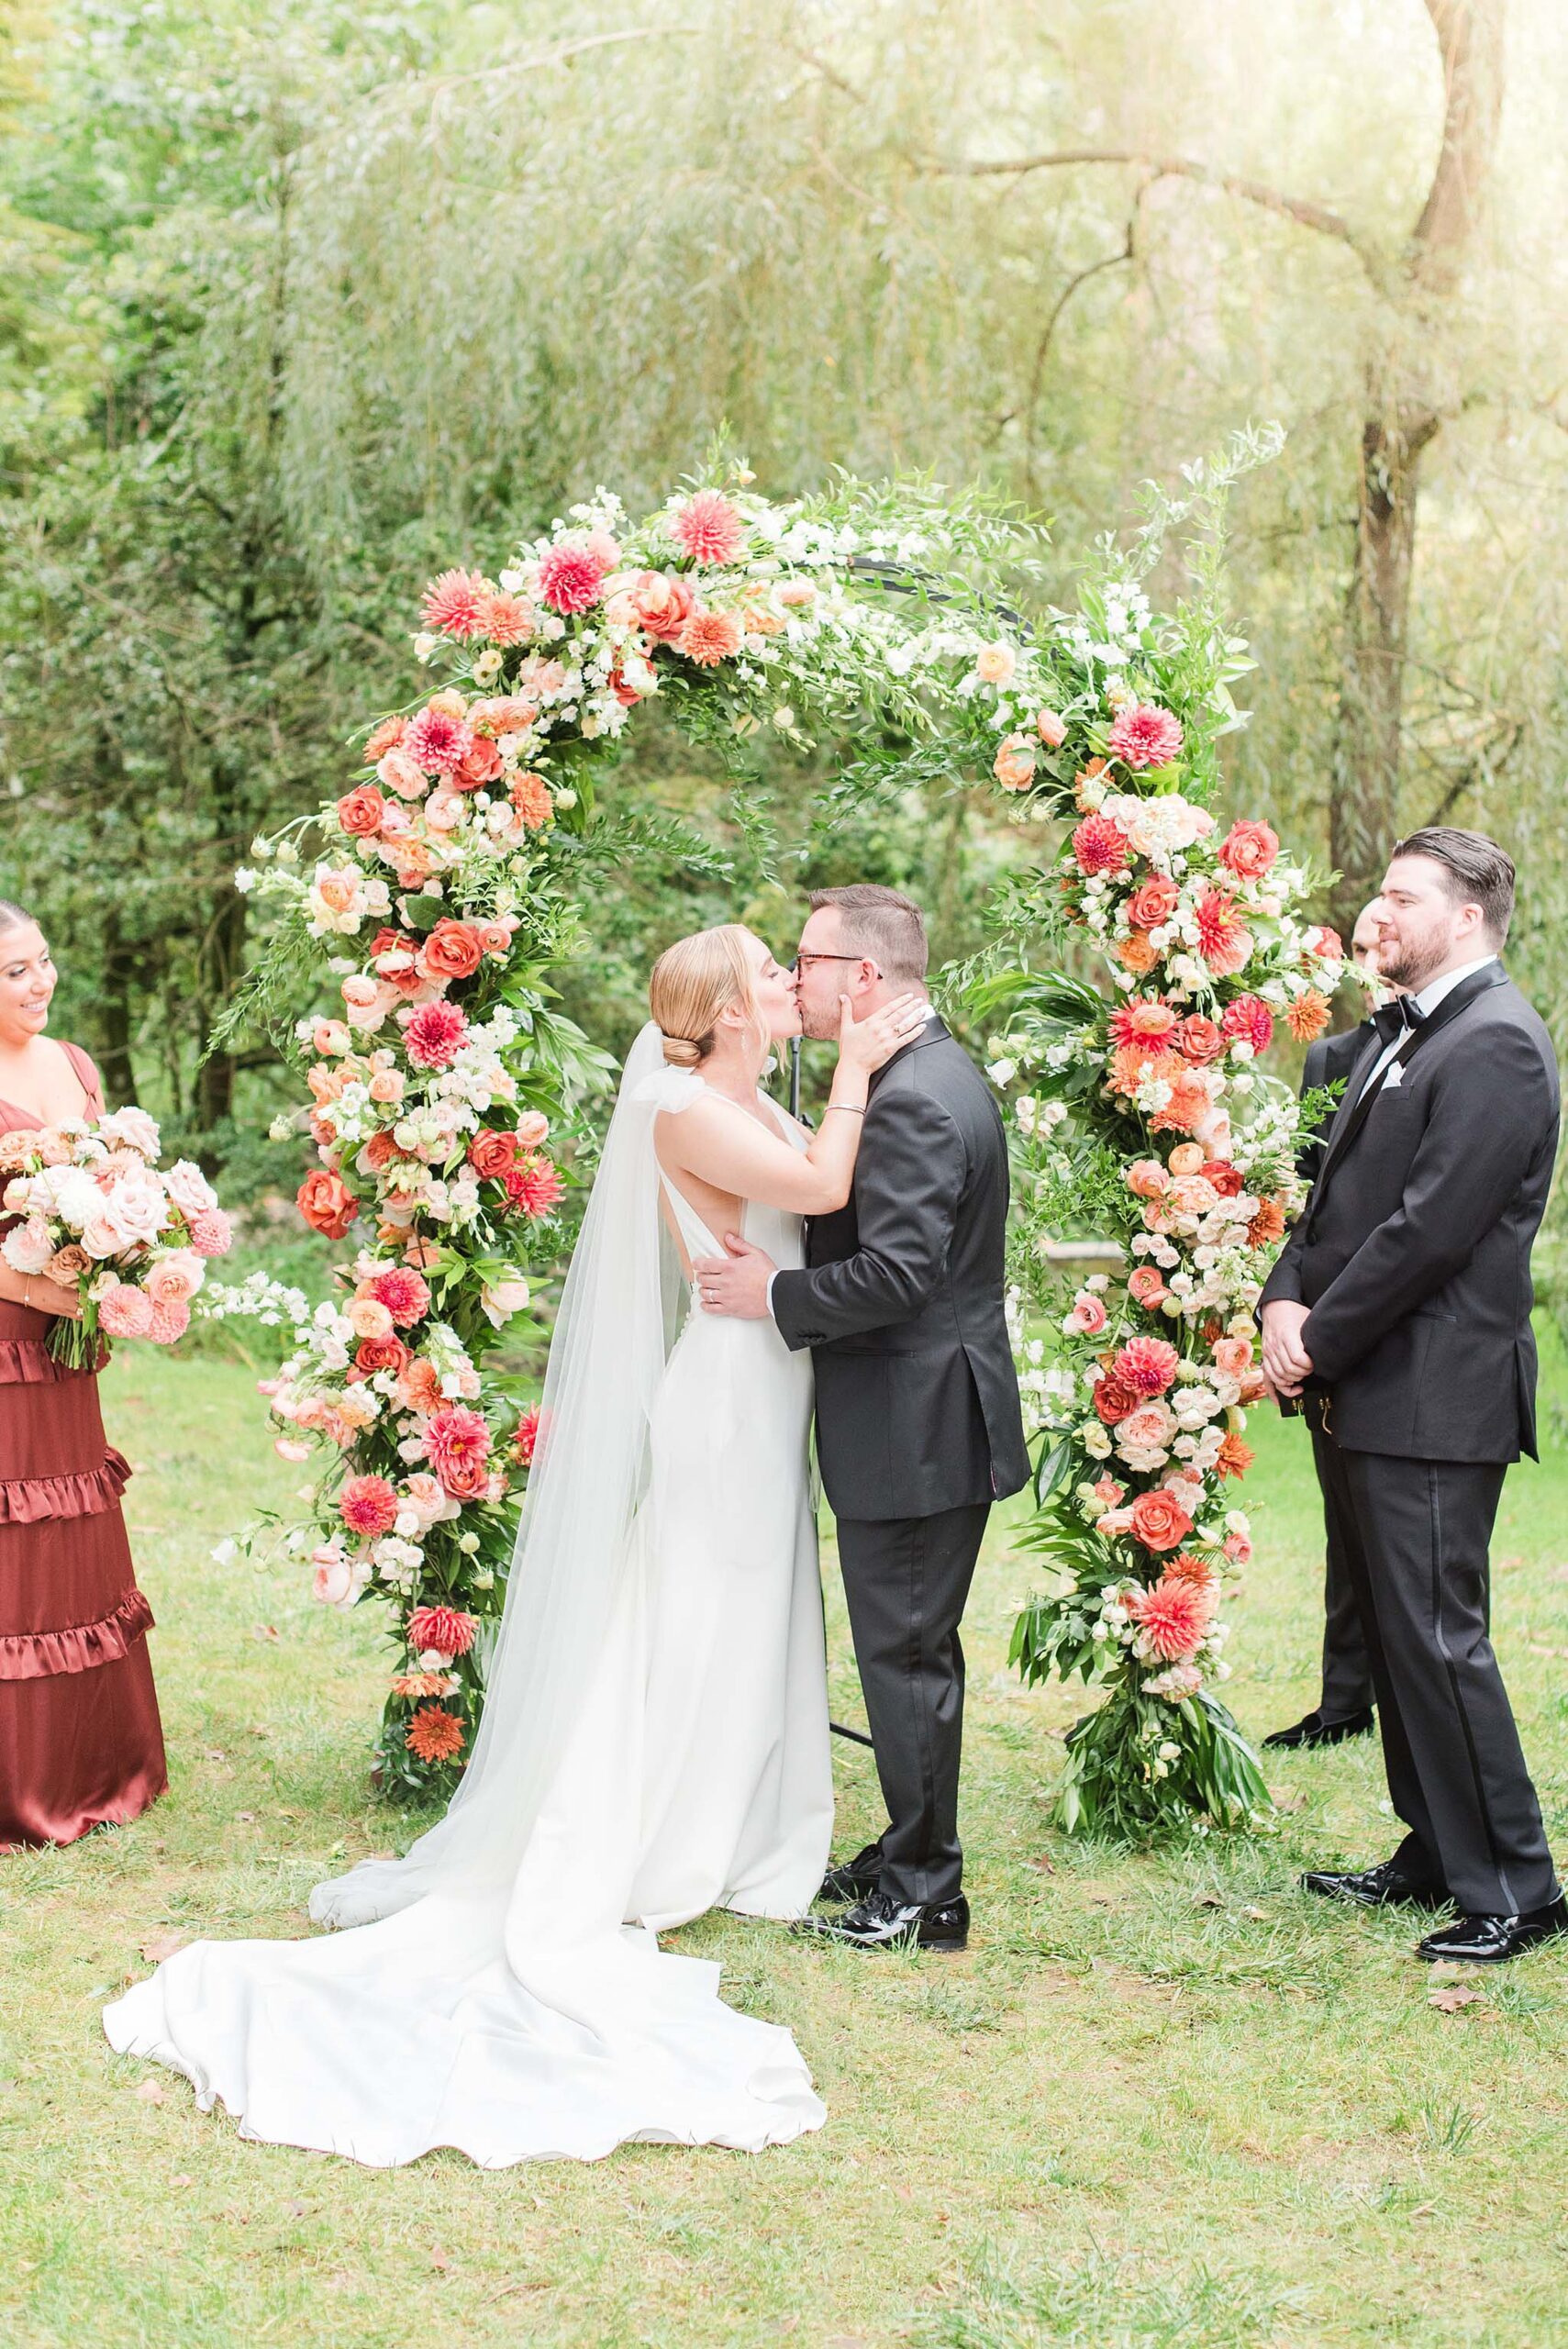 Newlyweds kiss under a colorful floral wedding arch at their outdoor Hunt Valley Country Club Wedding ceremony